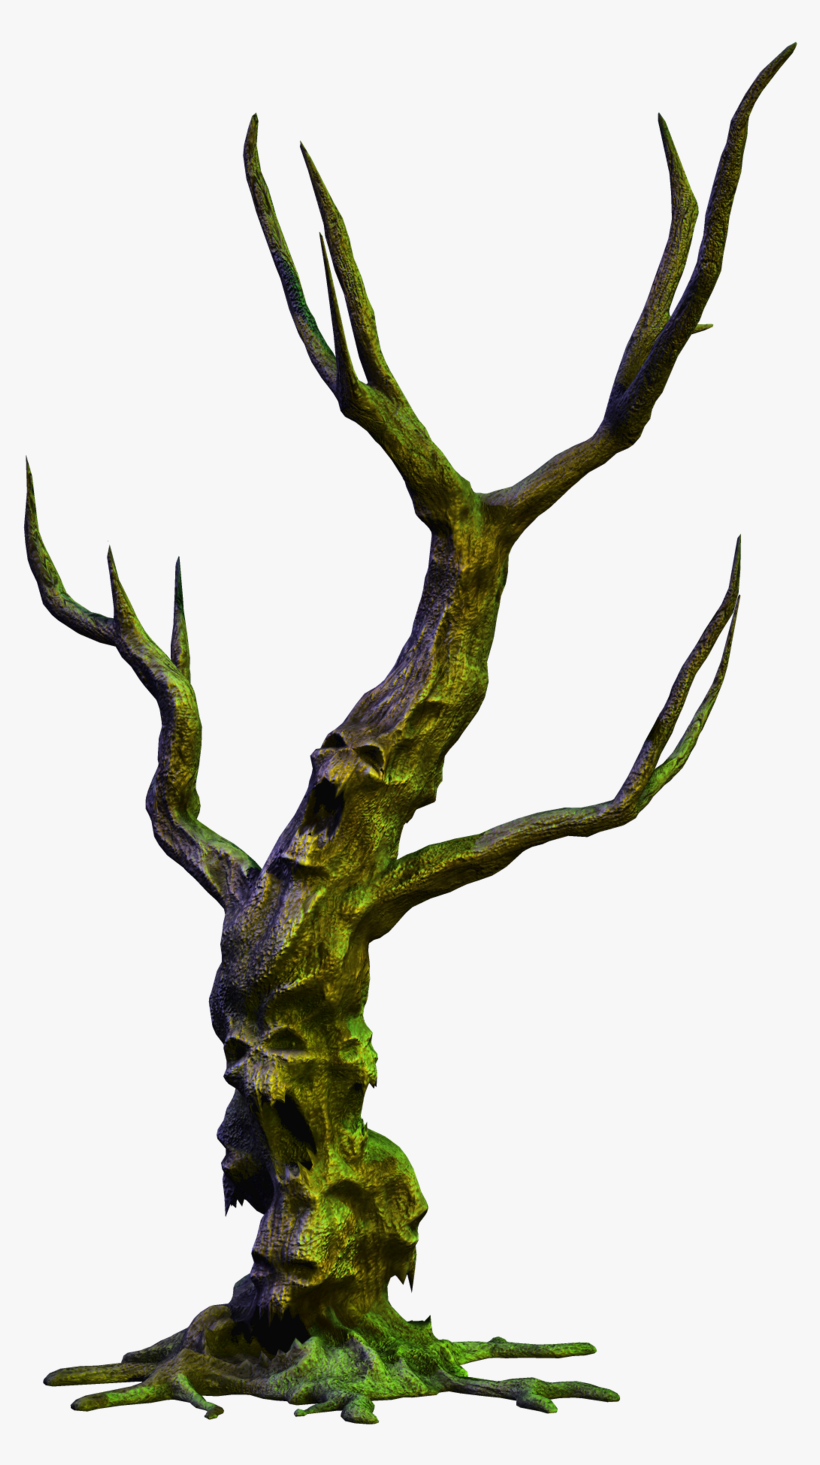 Spooky Tree Png Jpg Download - Old Scary Tree Png, transparent png #1614921